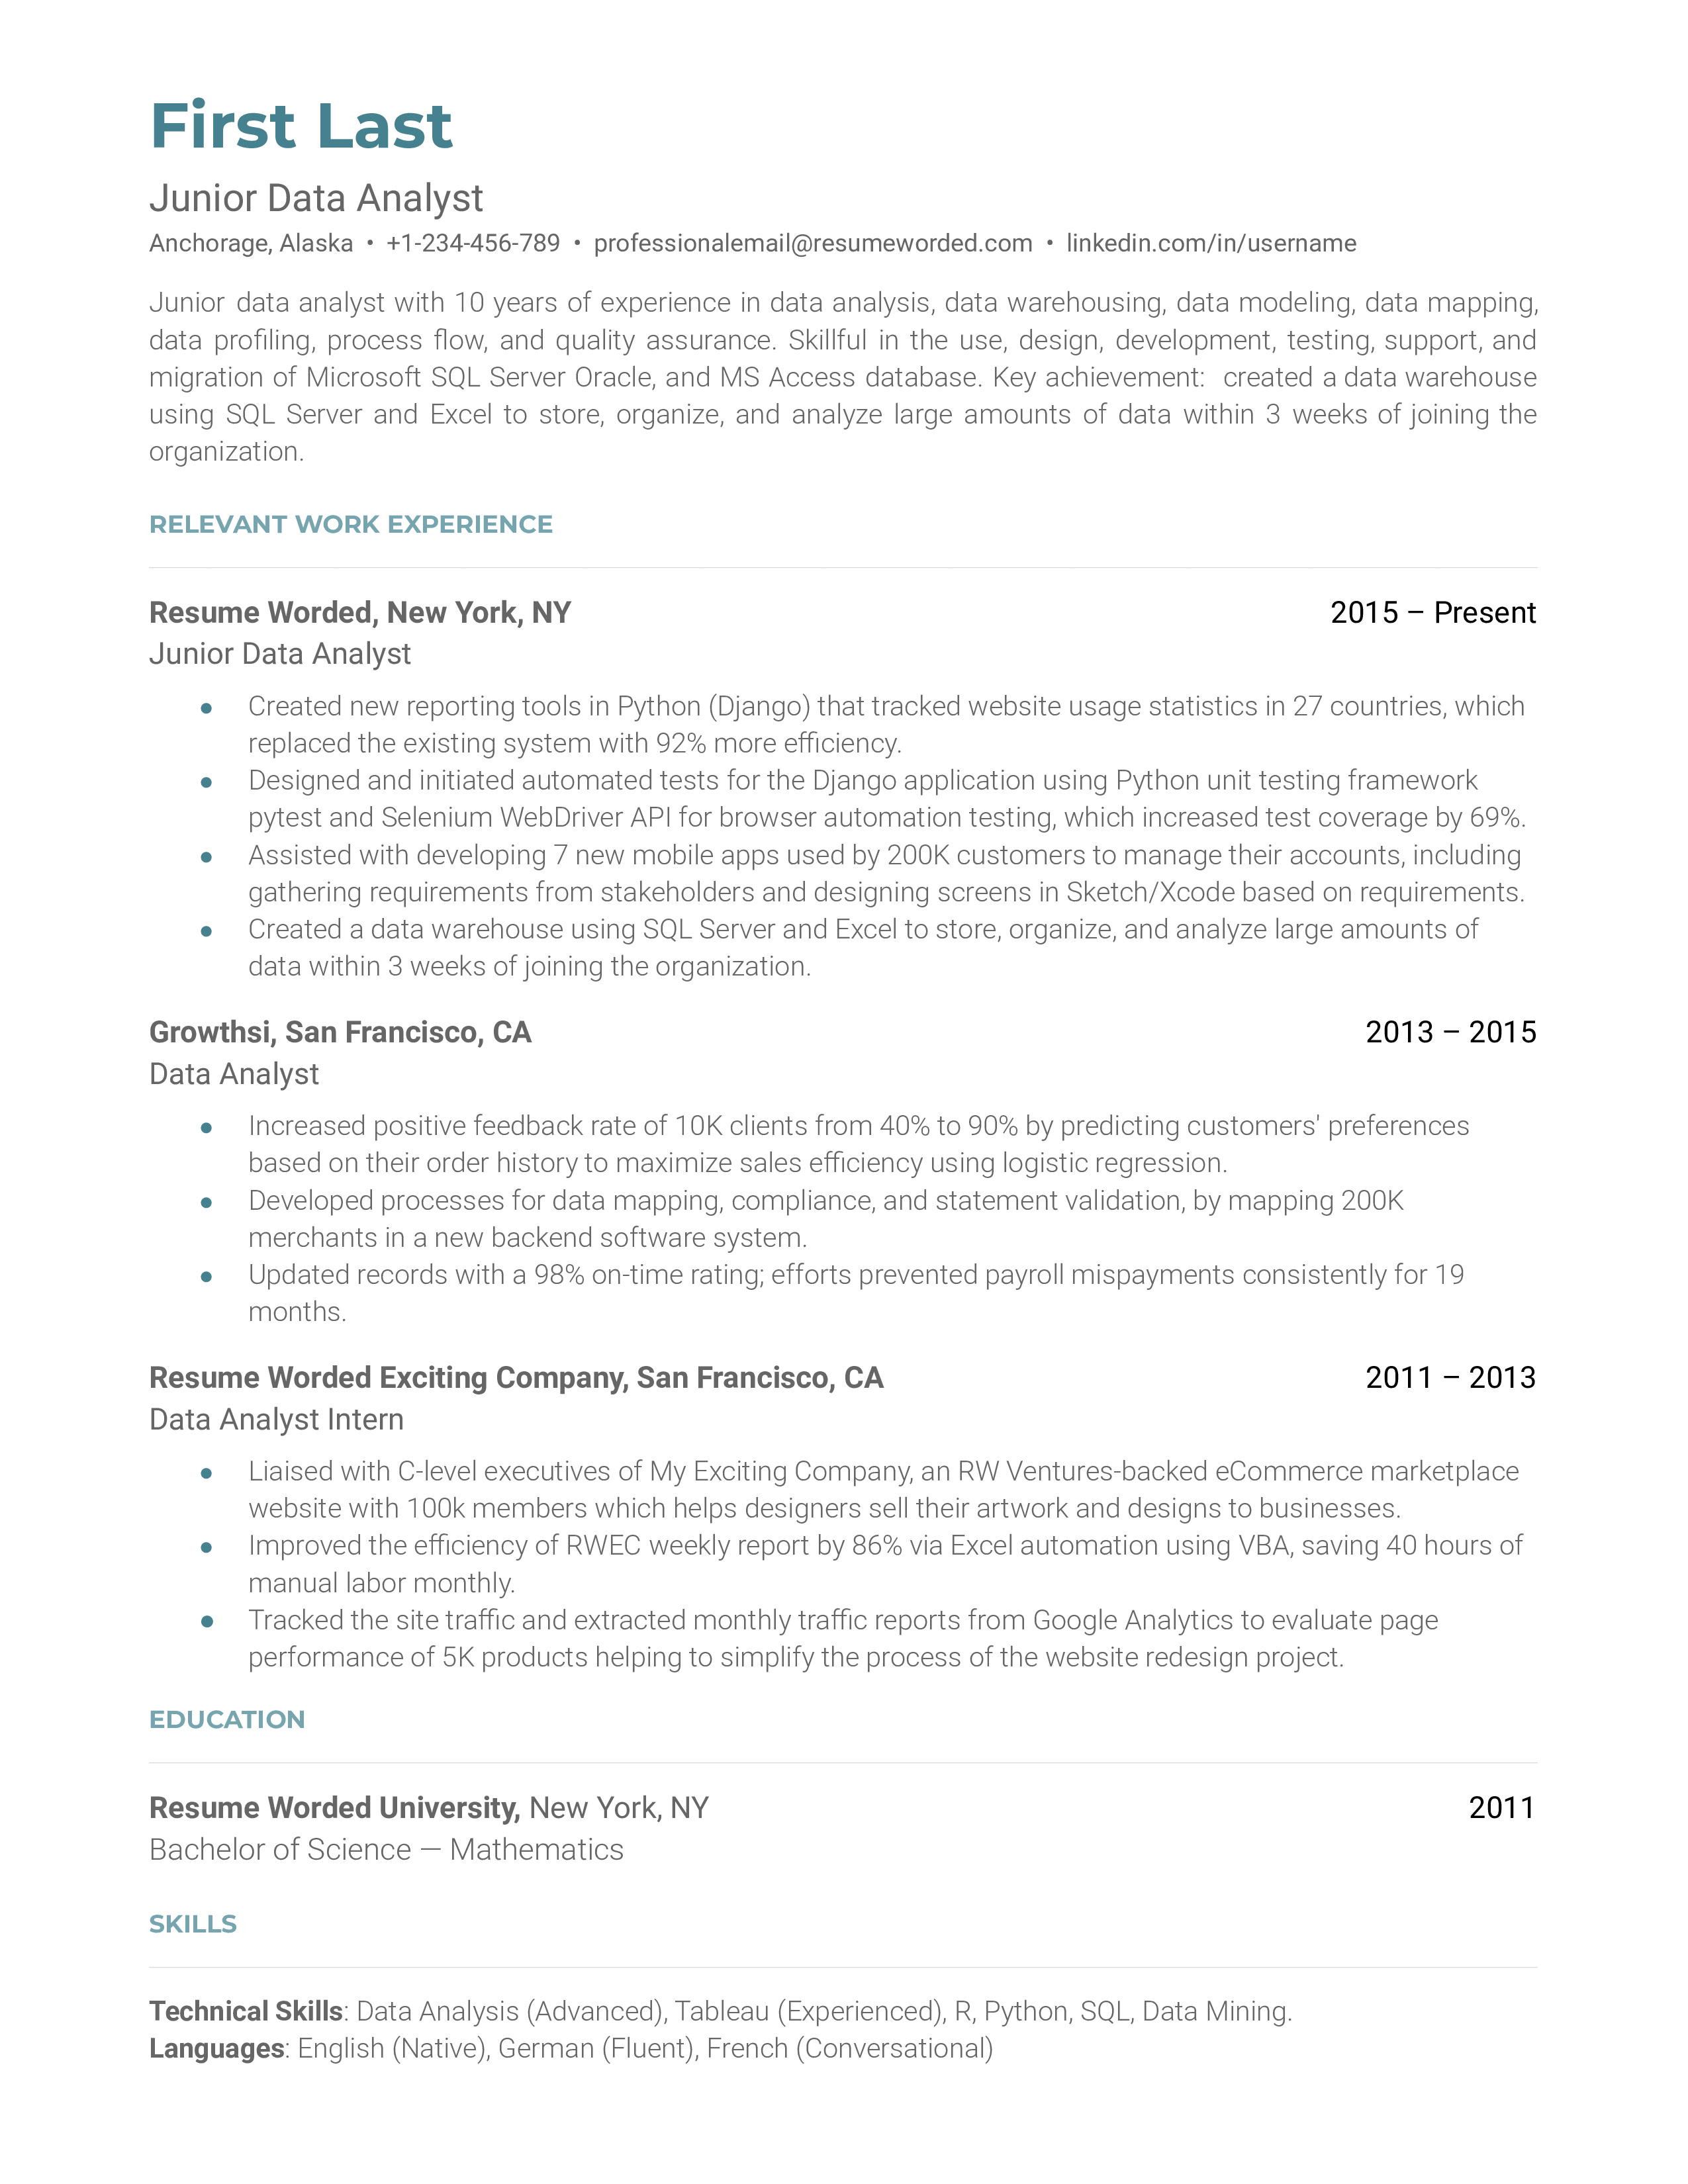 A screenshot of a well-structured CV for a Junior Data Analyst role.